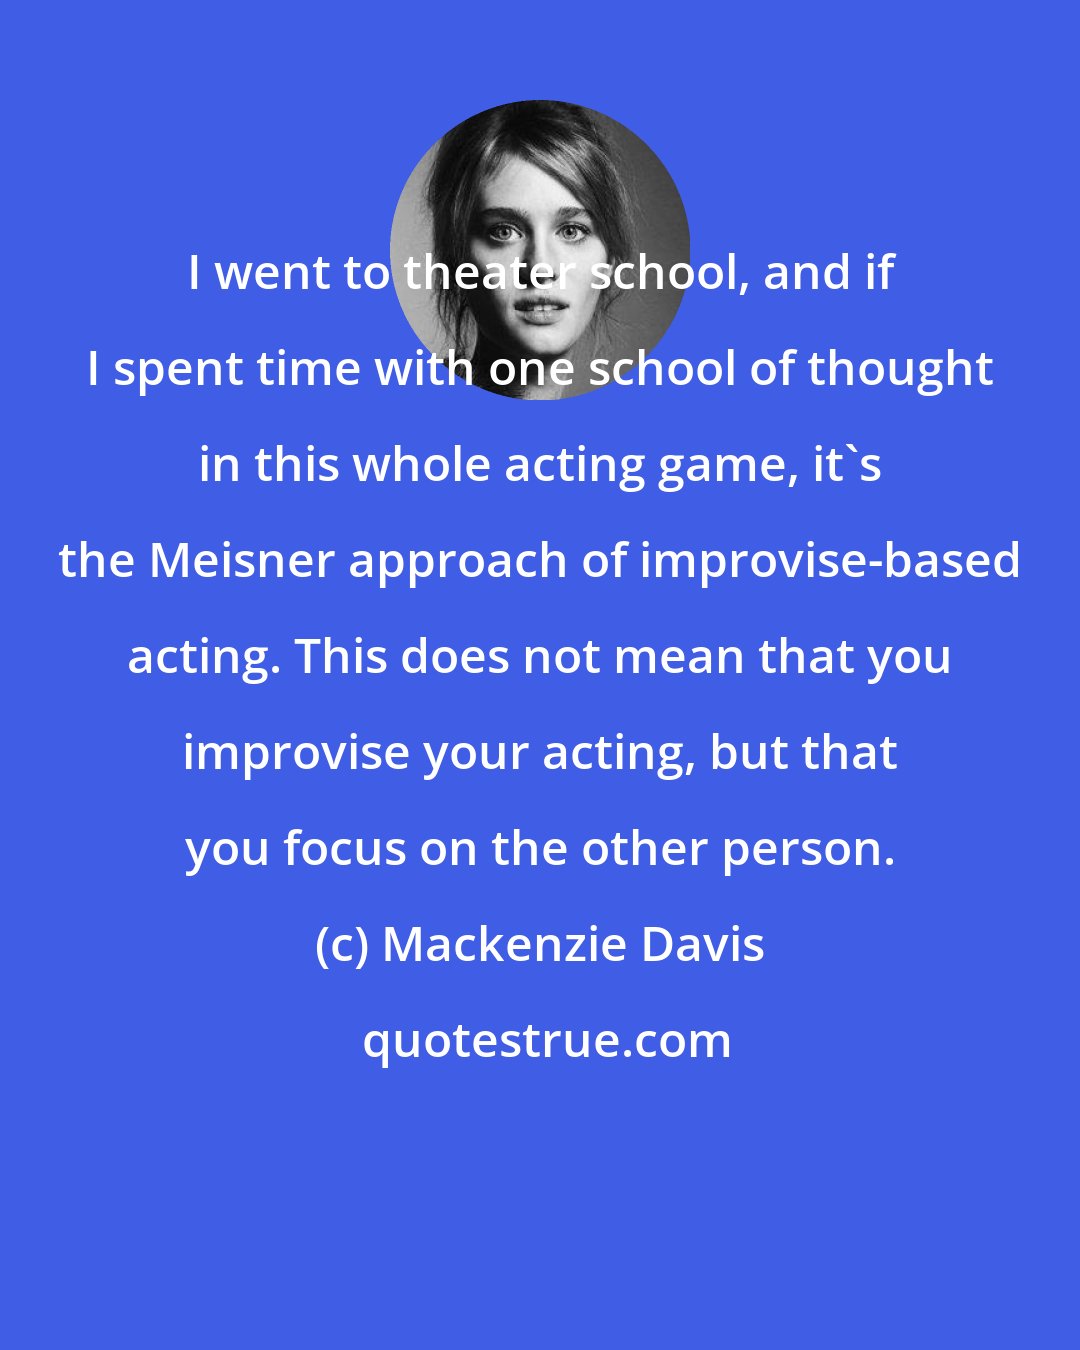 Mackenzie Davis: I went to theater school, and if I spent time with one school of thought in this whole acting game, it's the Meisner approach of improvise-based acting. This does not mean that you improvise your acting, but that you focus on the other person.